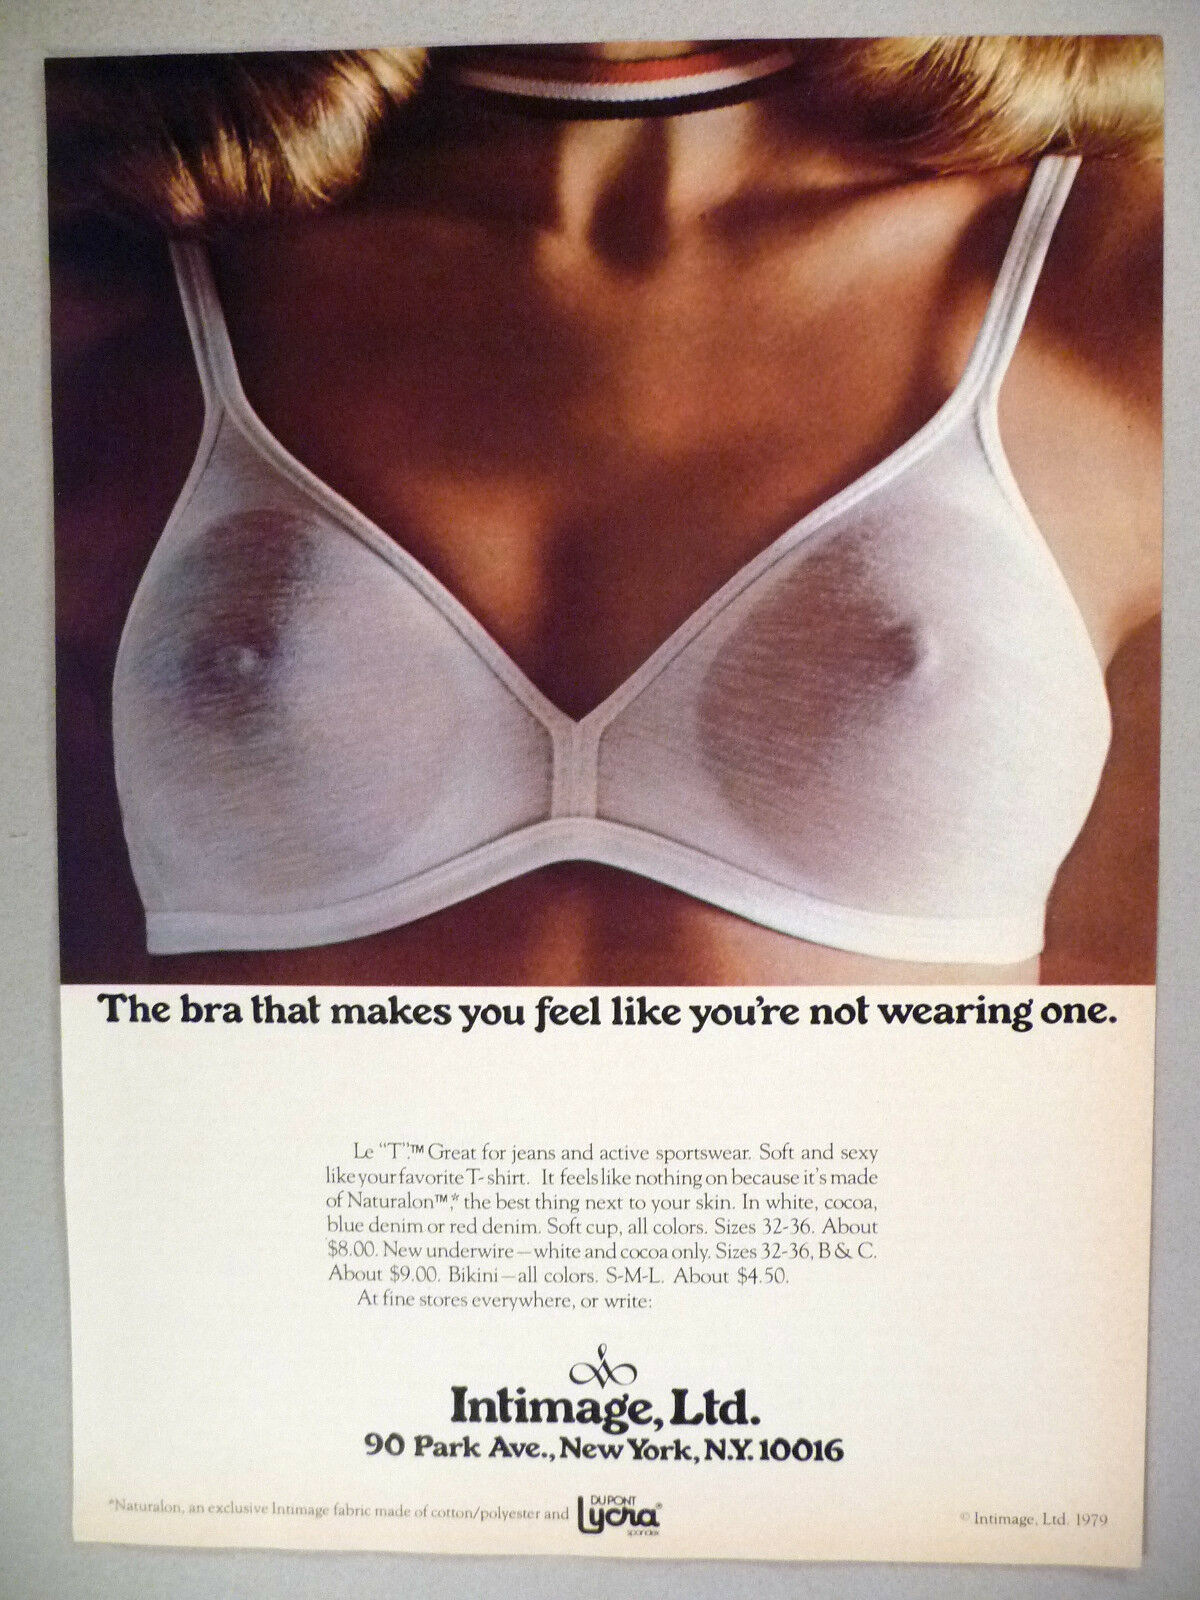 Le "t" Bra By Intimage Print Ad - 1979